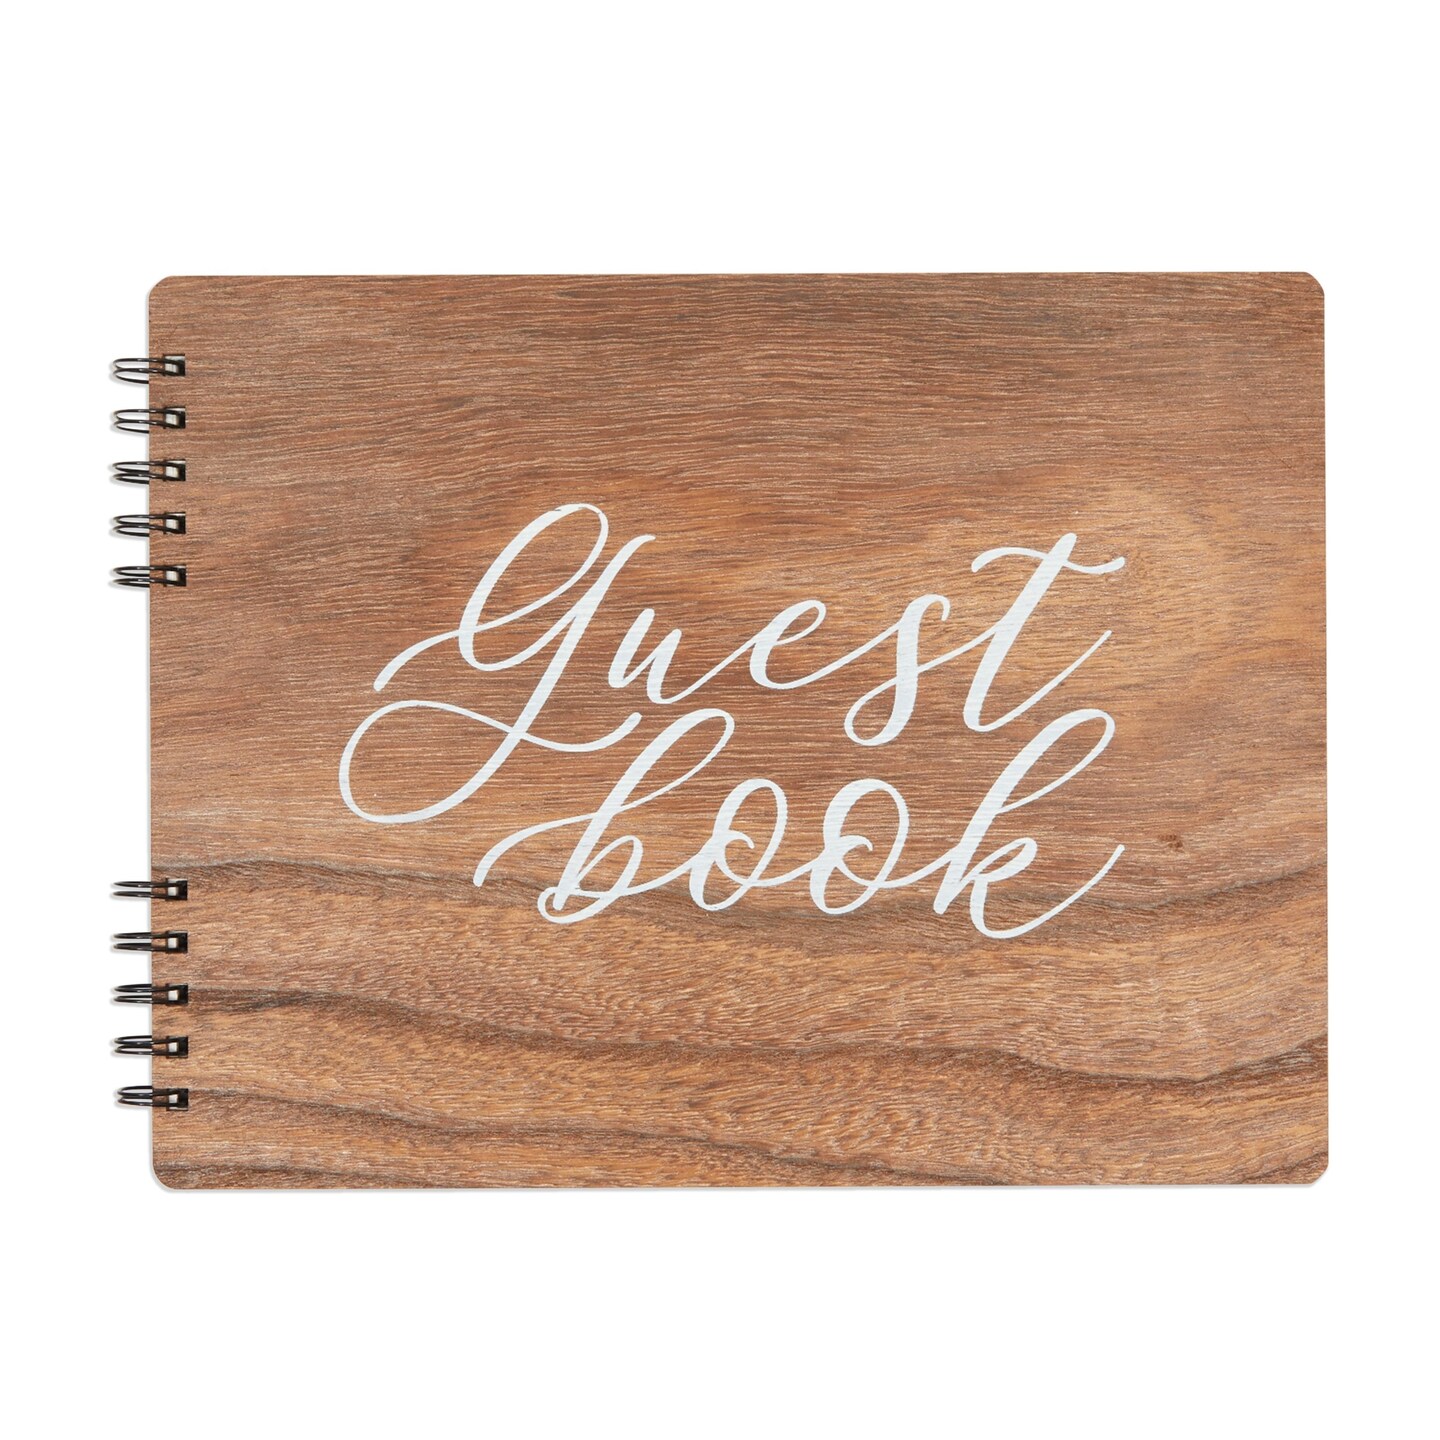 Rustic Style Wooden Guest Book - Wedding Reception, Bridal Shower, Baby Shower, Quinceanera Guest Book (112 pages, 11.25x8.75 In)